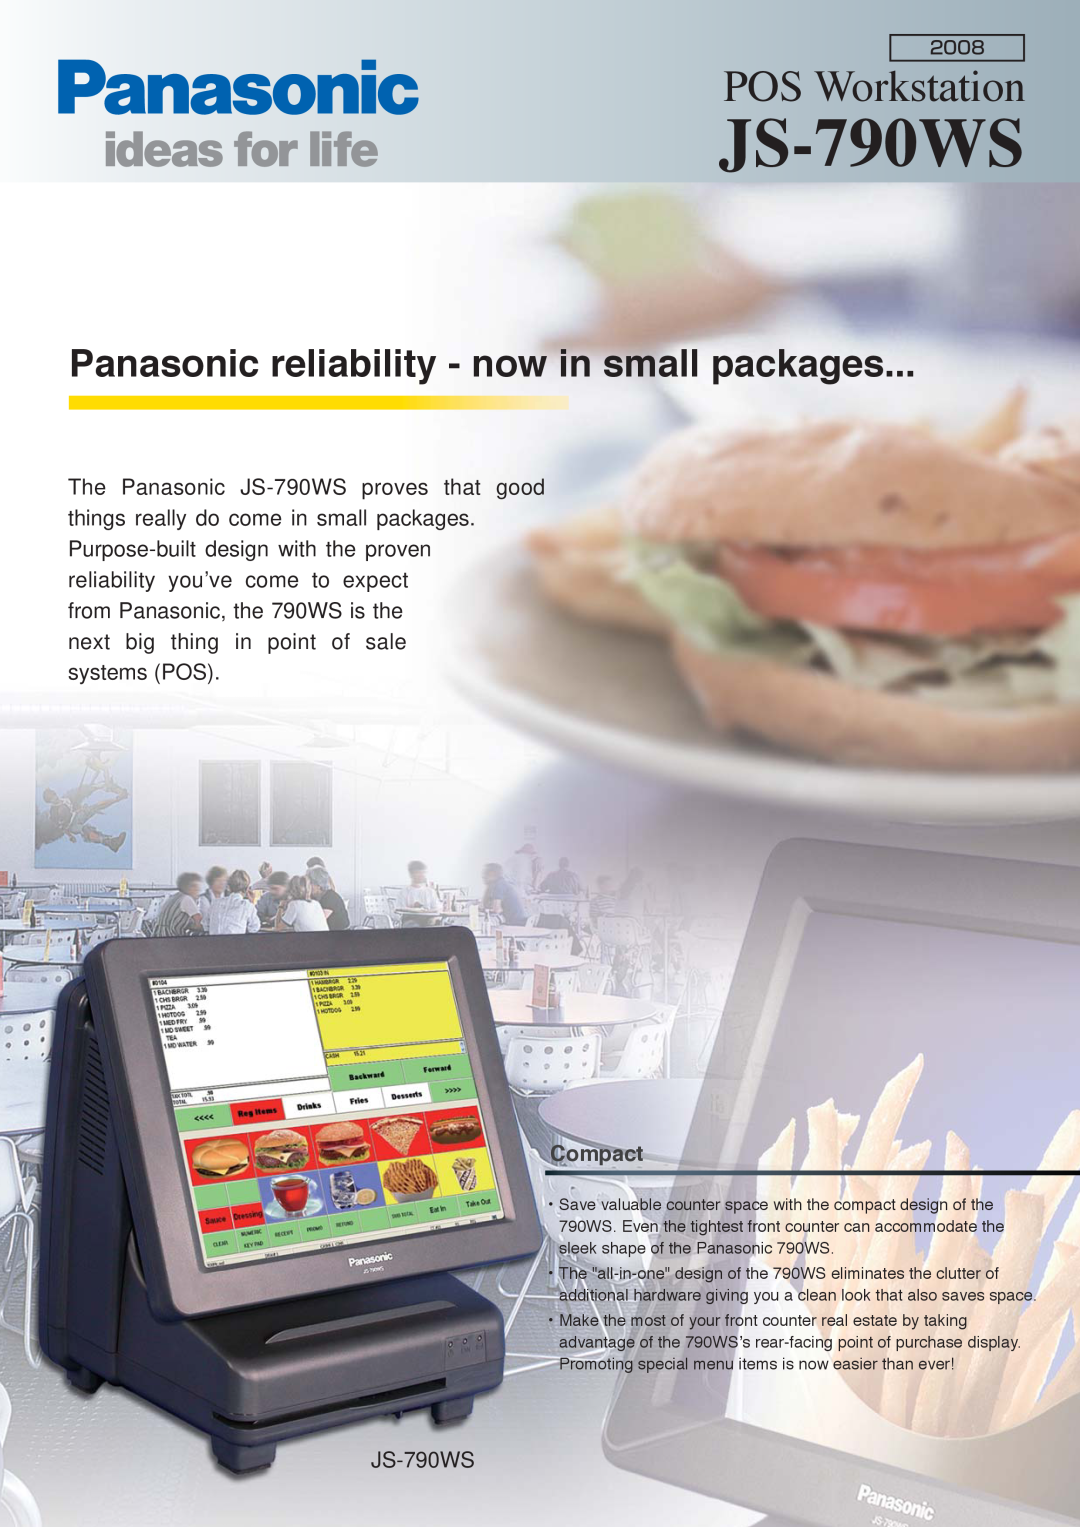 Panasonic JS-790WS manual POS Workstation, Panasonic reliability - now in small packages, Compact 